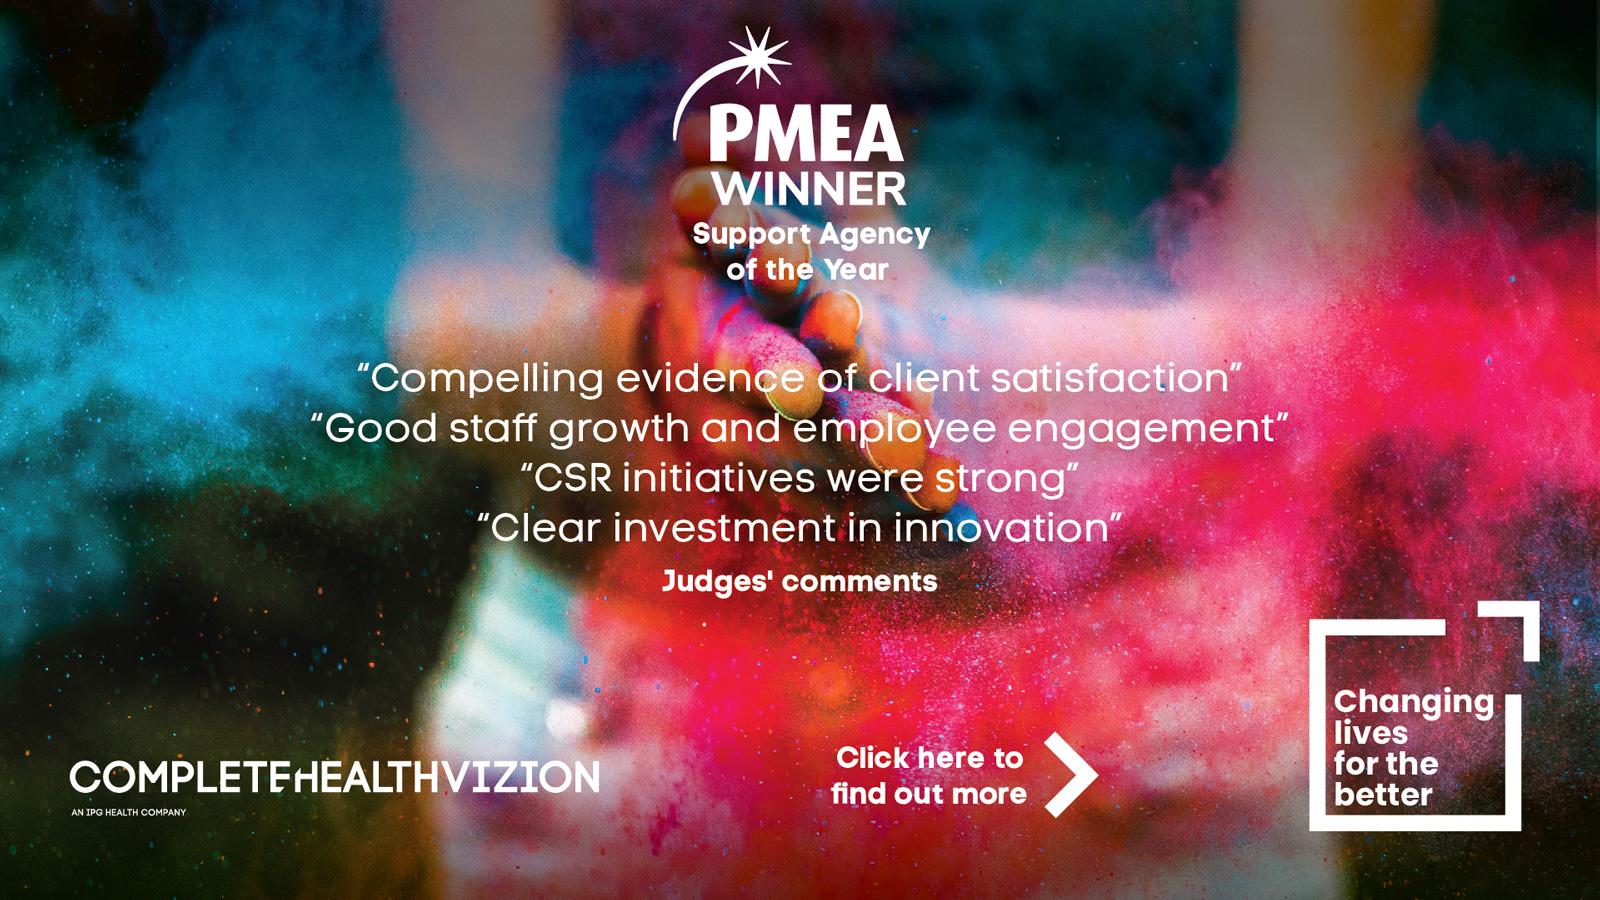 Winner Complete HealthVizion PMEA Support Agency of the Year